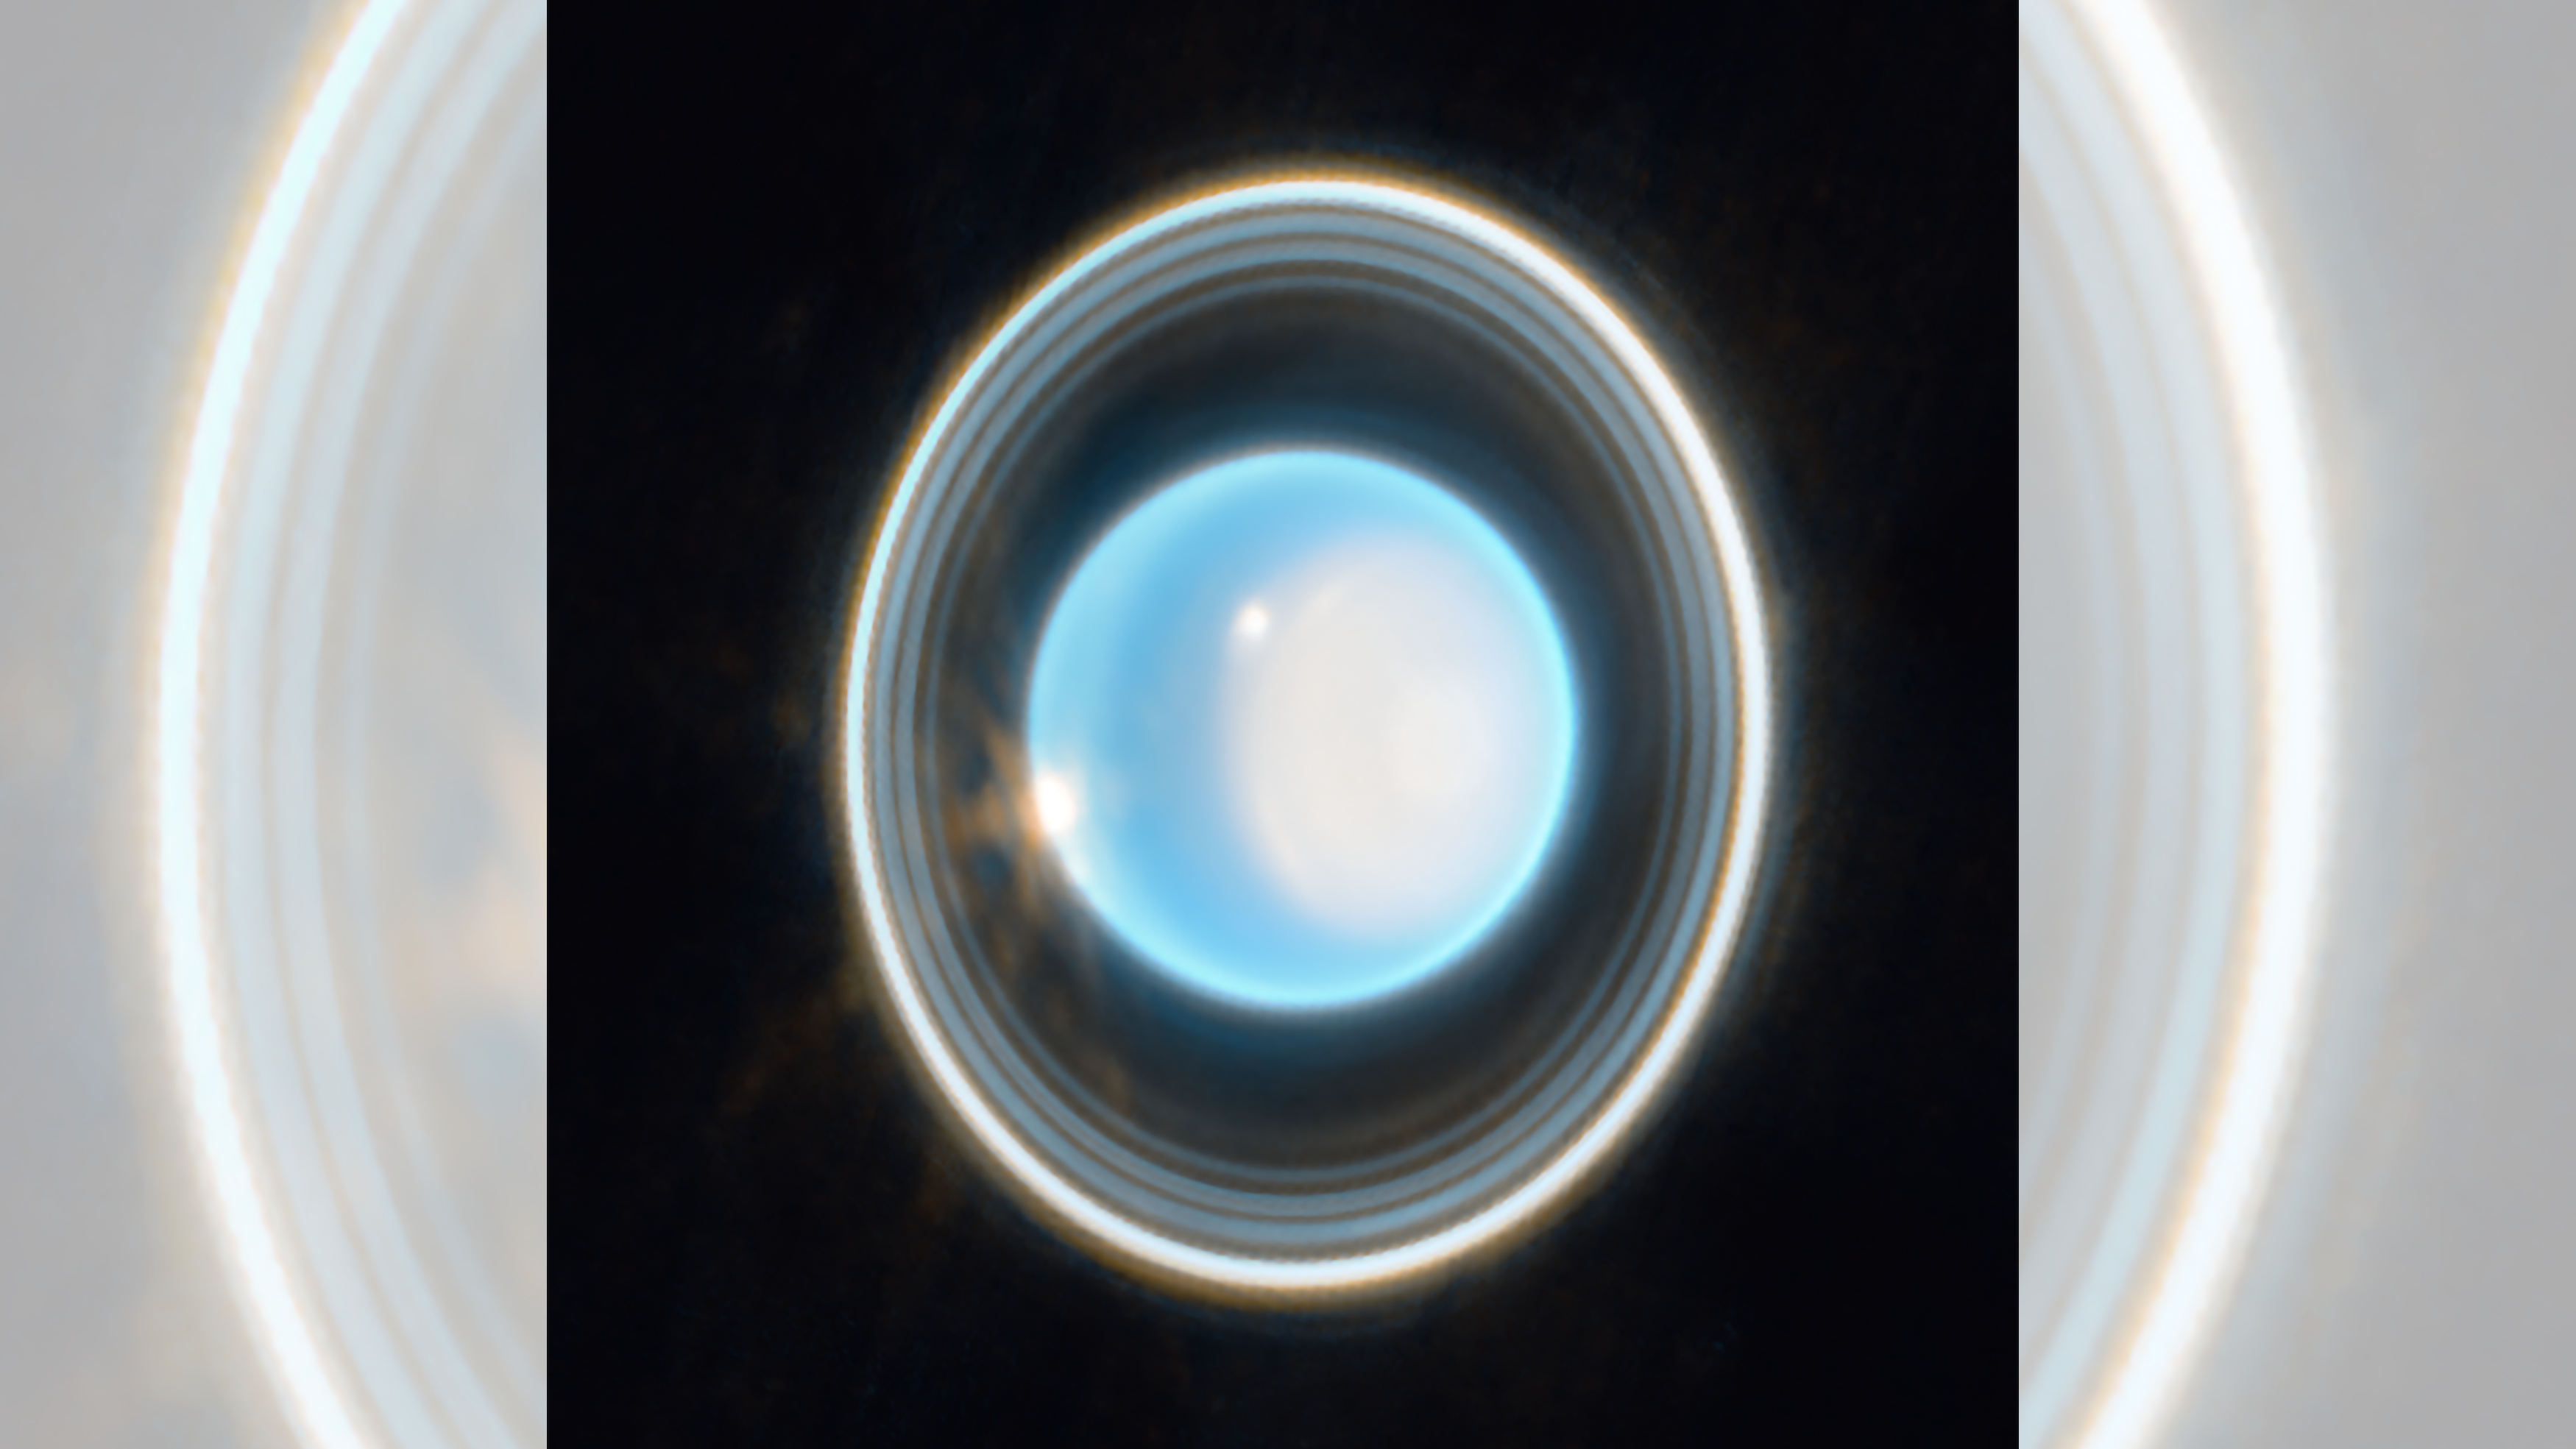 Uranus, the 7th planet from the sun, appears as a shiny blue ball surrounded by white rings in this James Webb Space Telescope image